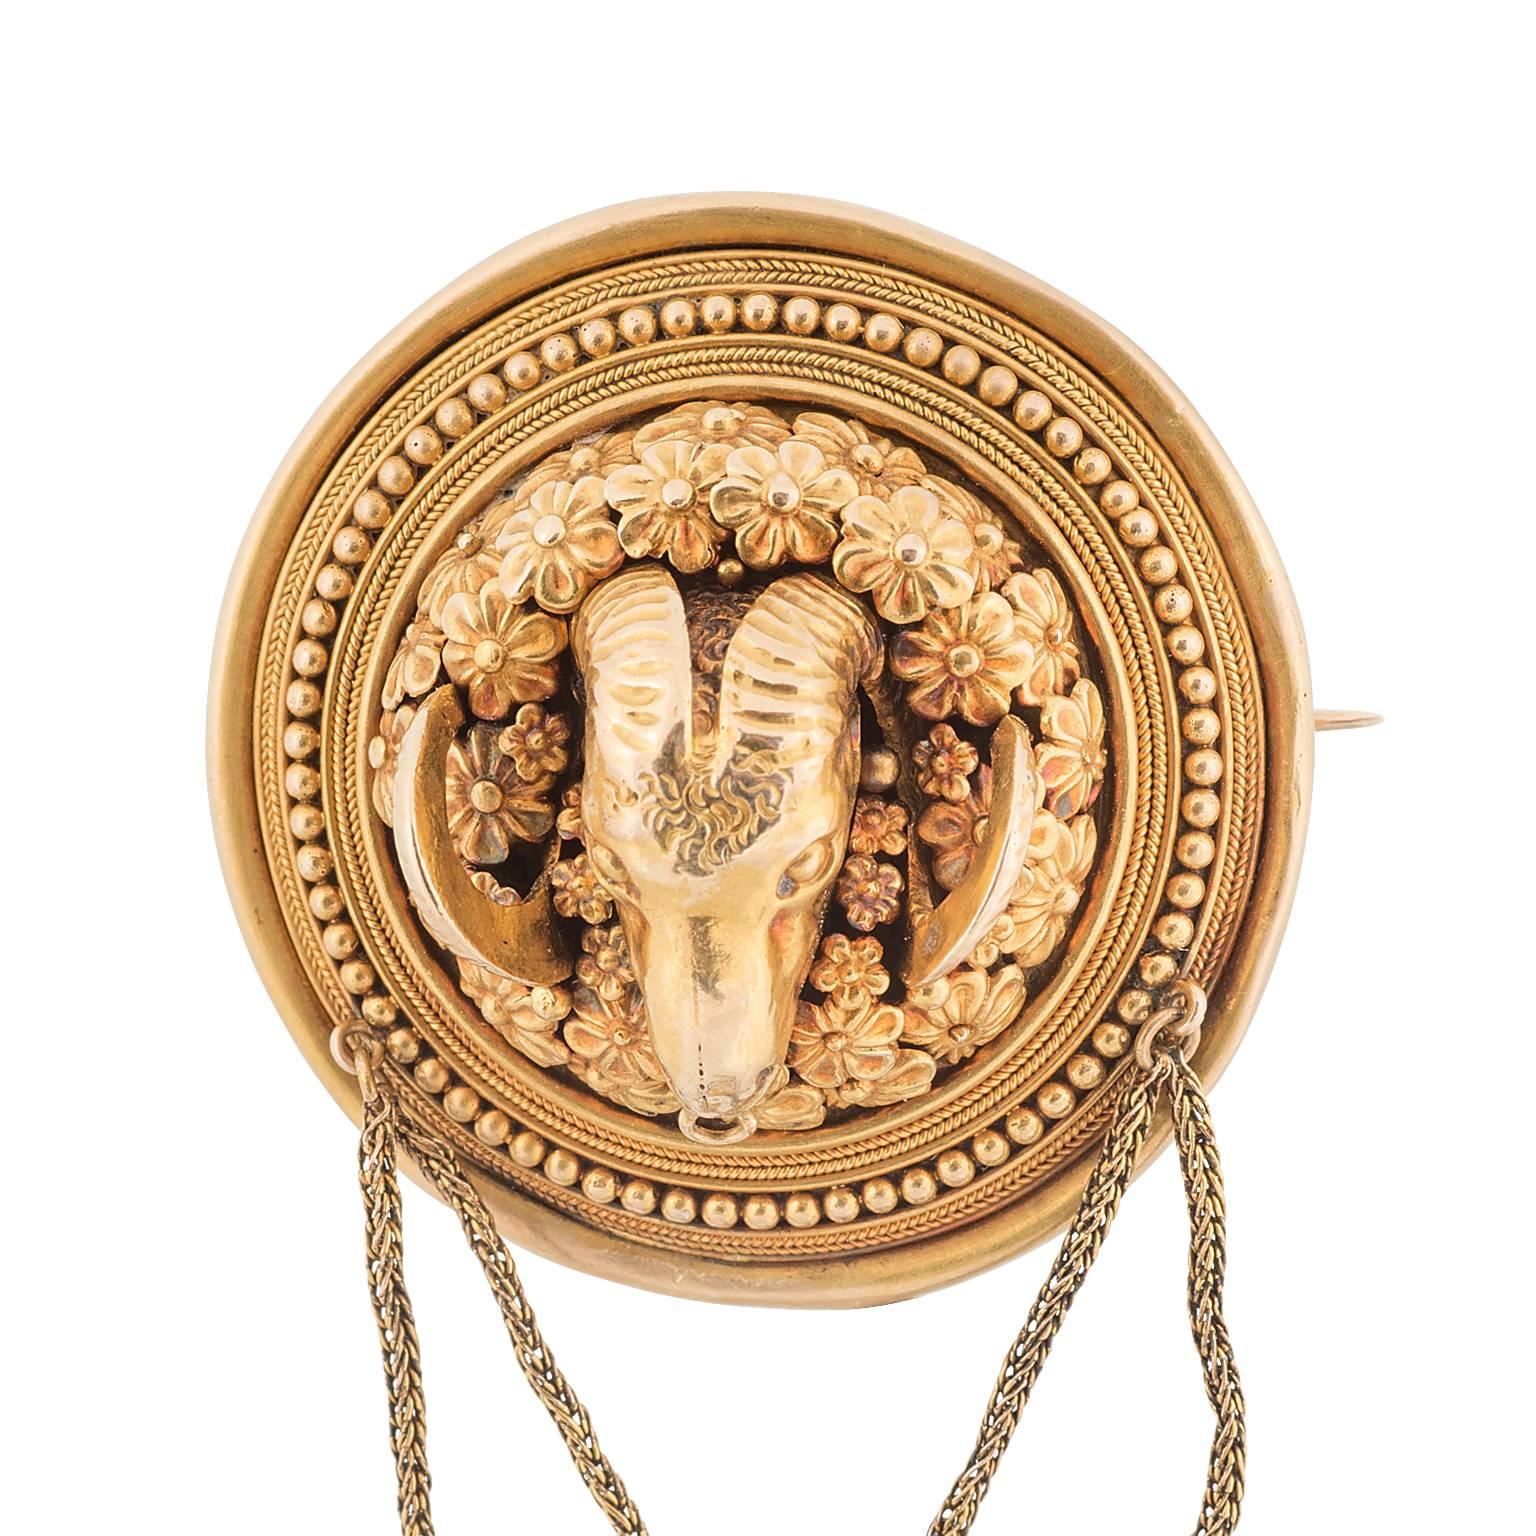 An Ernesto Pierret Victorian era 18 karat gold ram's head brooch.  The ram is magnificently handcrafted, surrounded by flowers, and enclosed in a circular frame with a combination of coin edge and beaded gold work.  The brooch features a glass